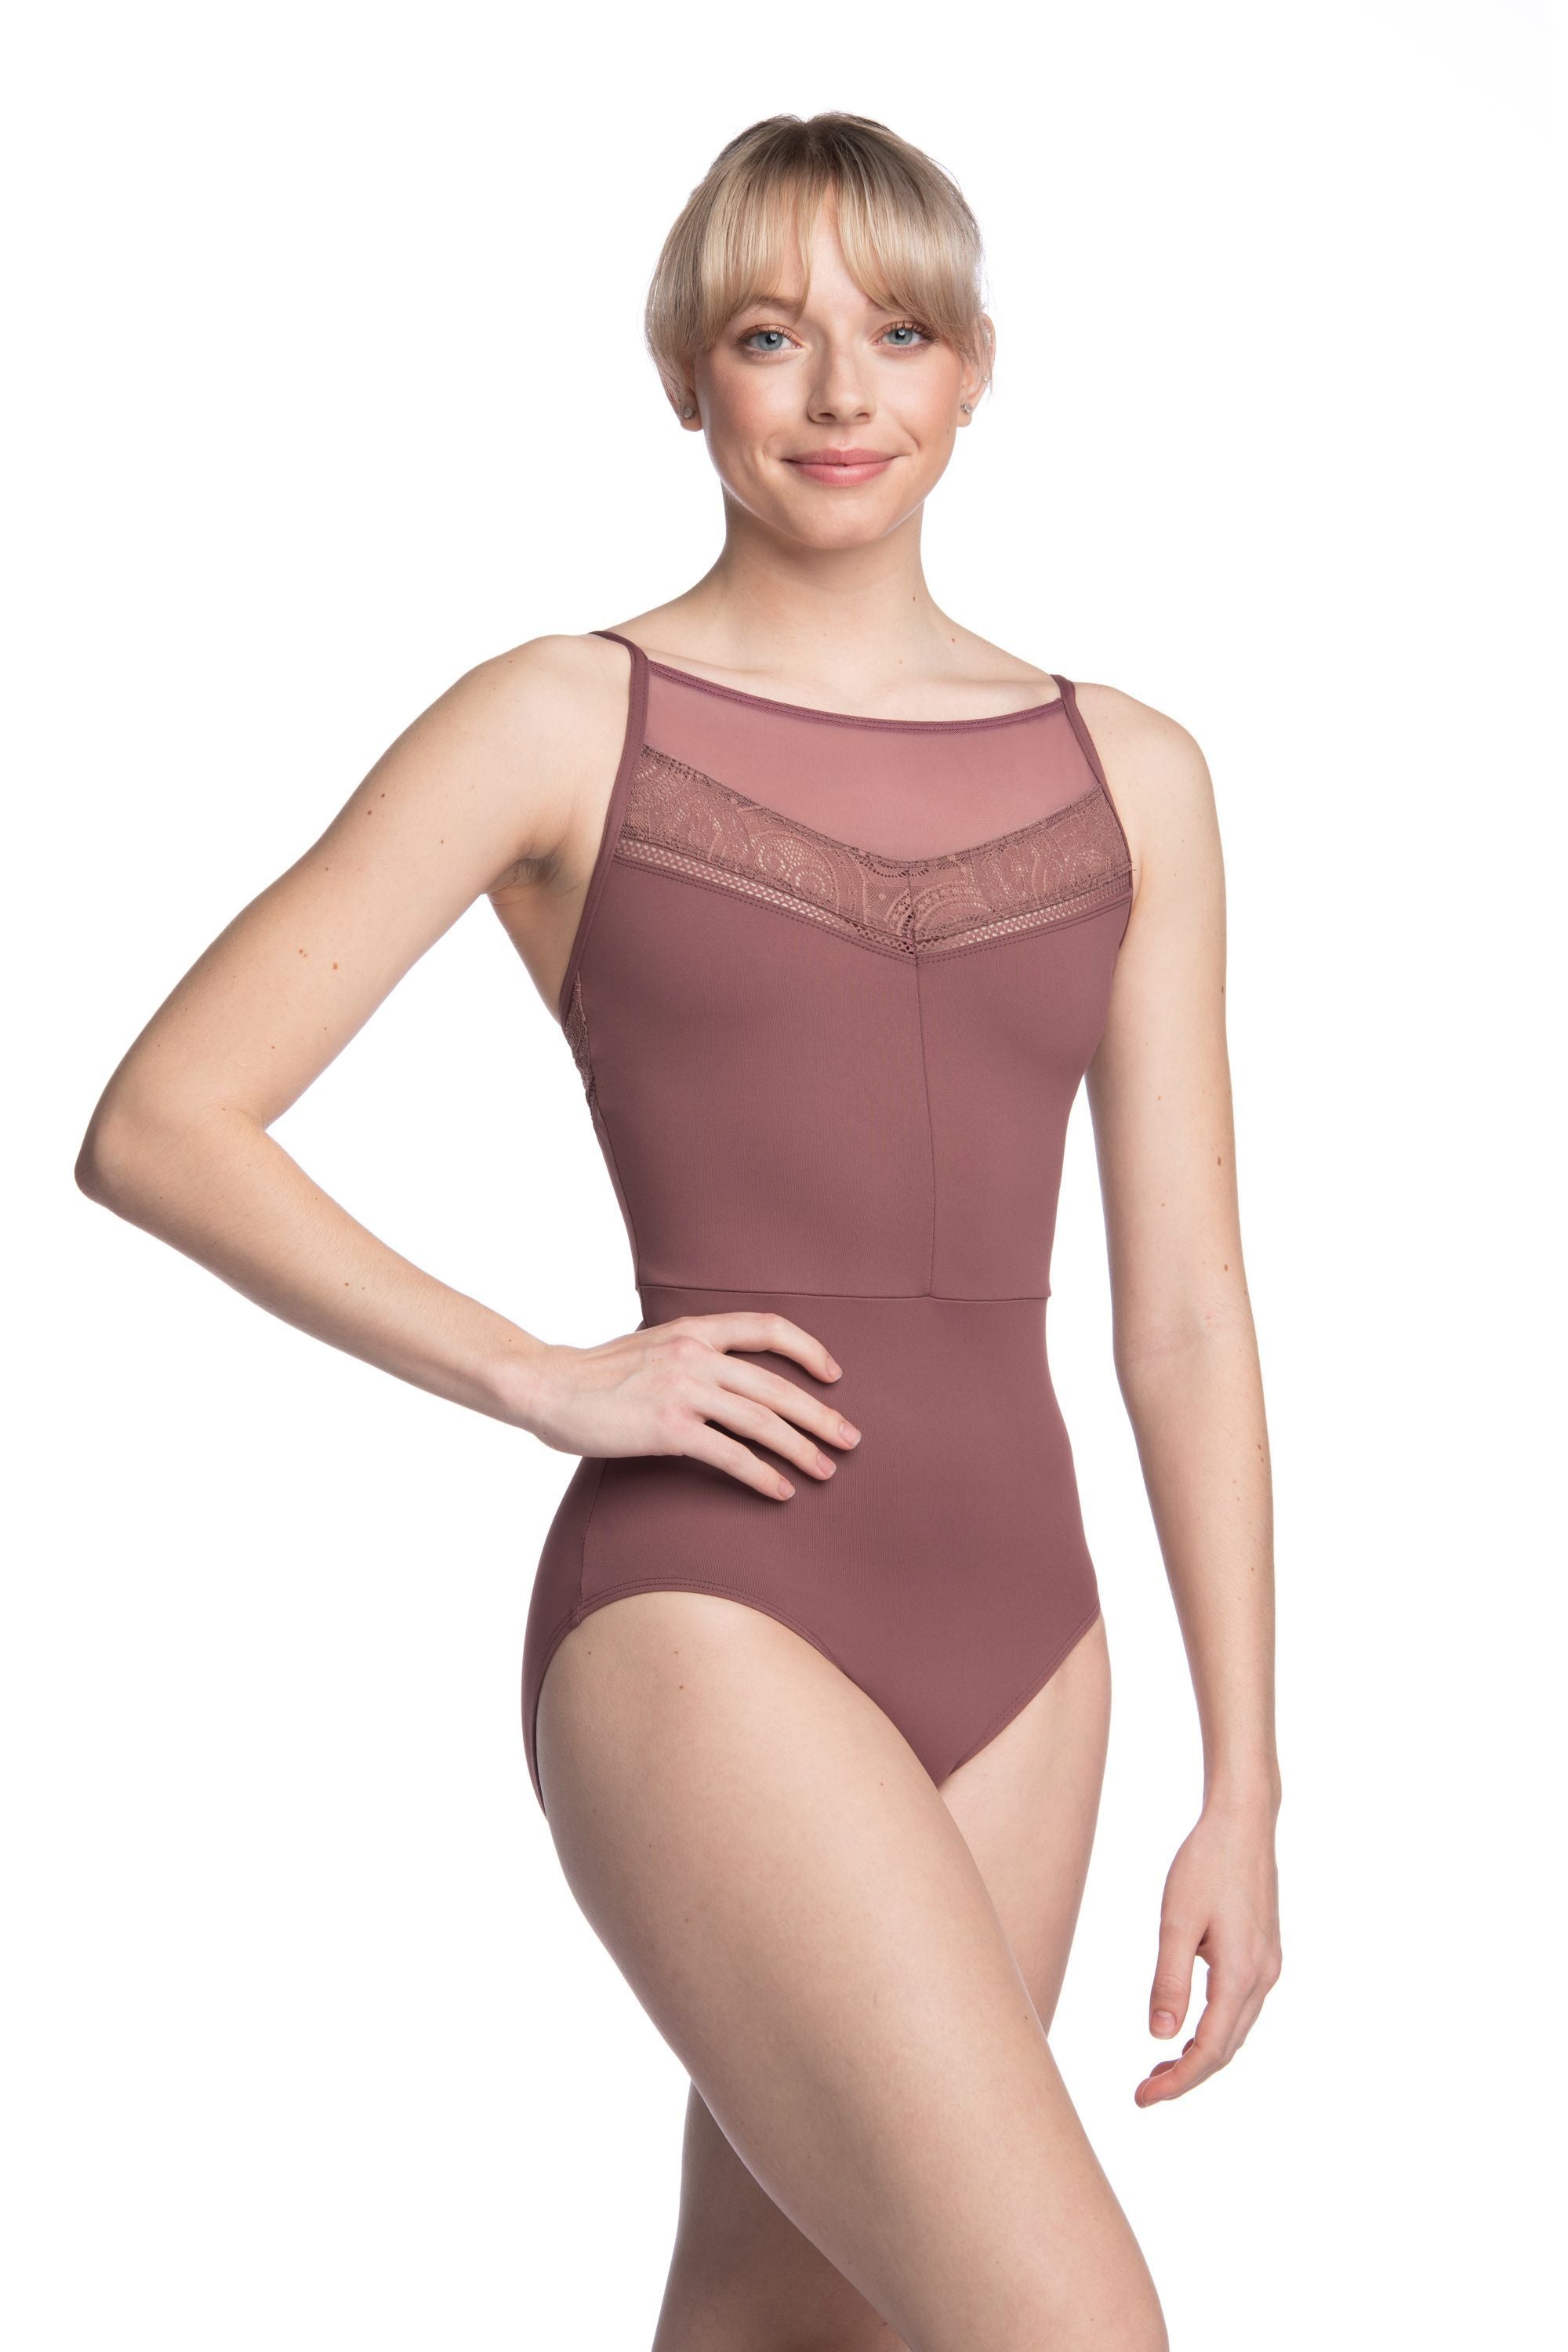 The Performance Shock with Traction – Inspirations Dancewear Canada